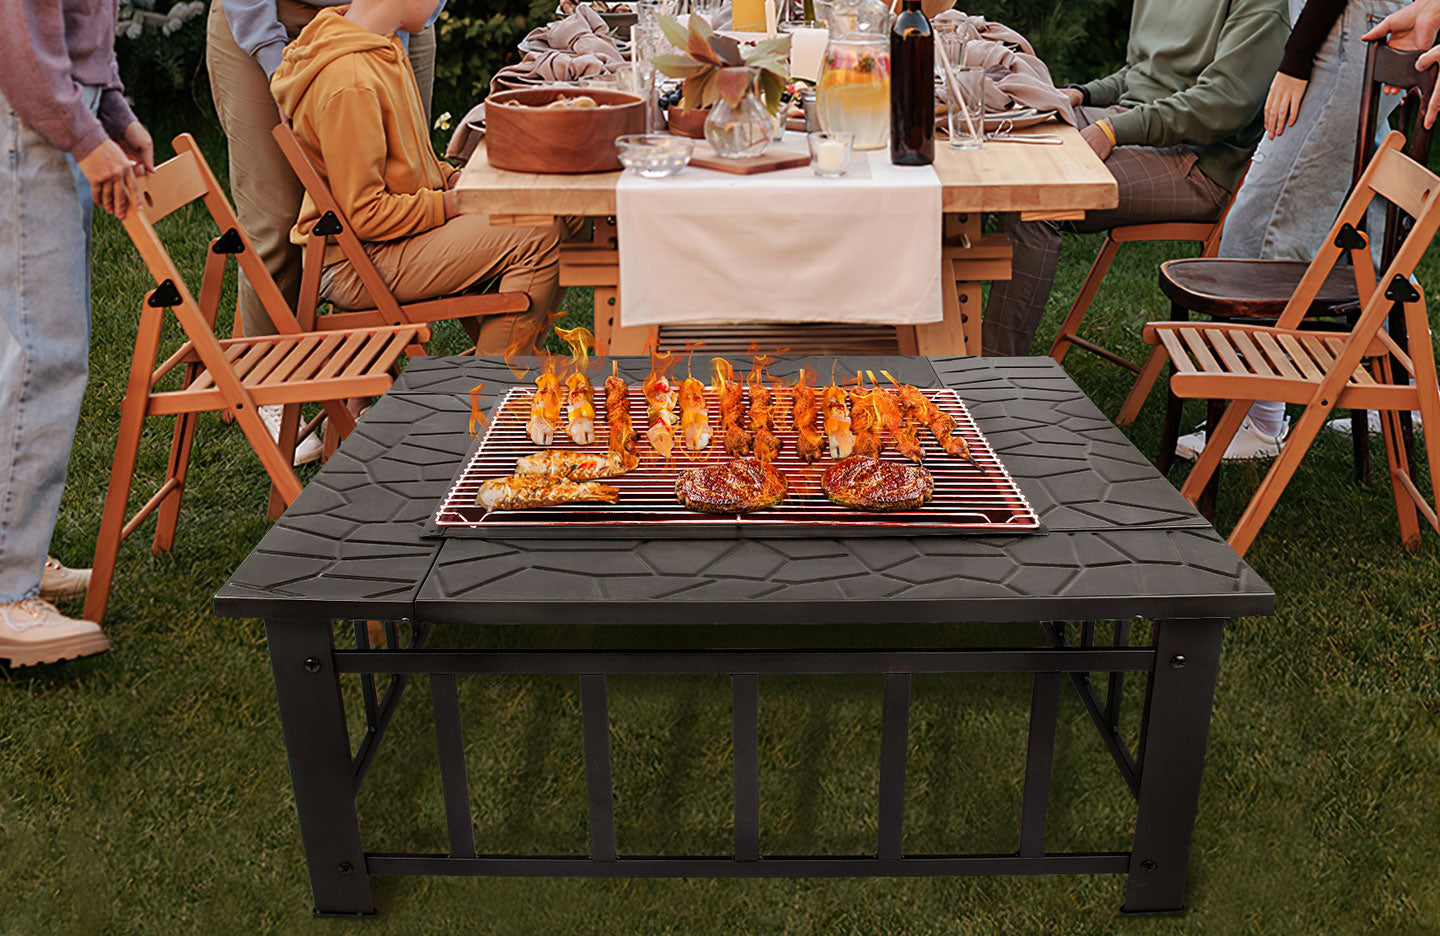 3 in 1 Patio Firepit Table Patio Heater with BBQ Grill, Poker, Lid, Rain Cover for Garden Outdoor